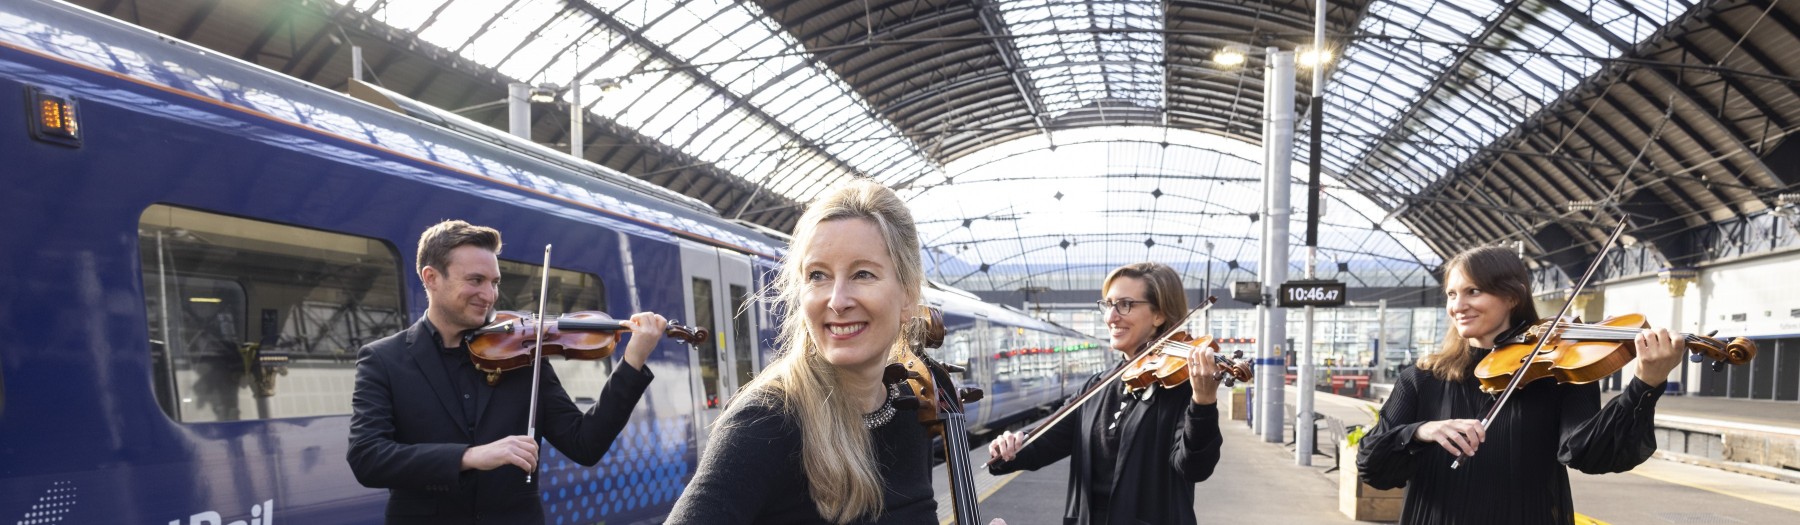 A string quartet plays beside a ScotRail train at a platform in Queen St Station